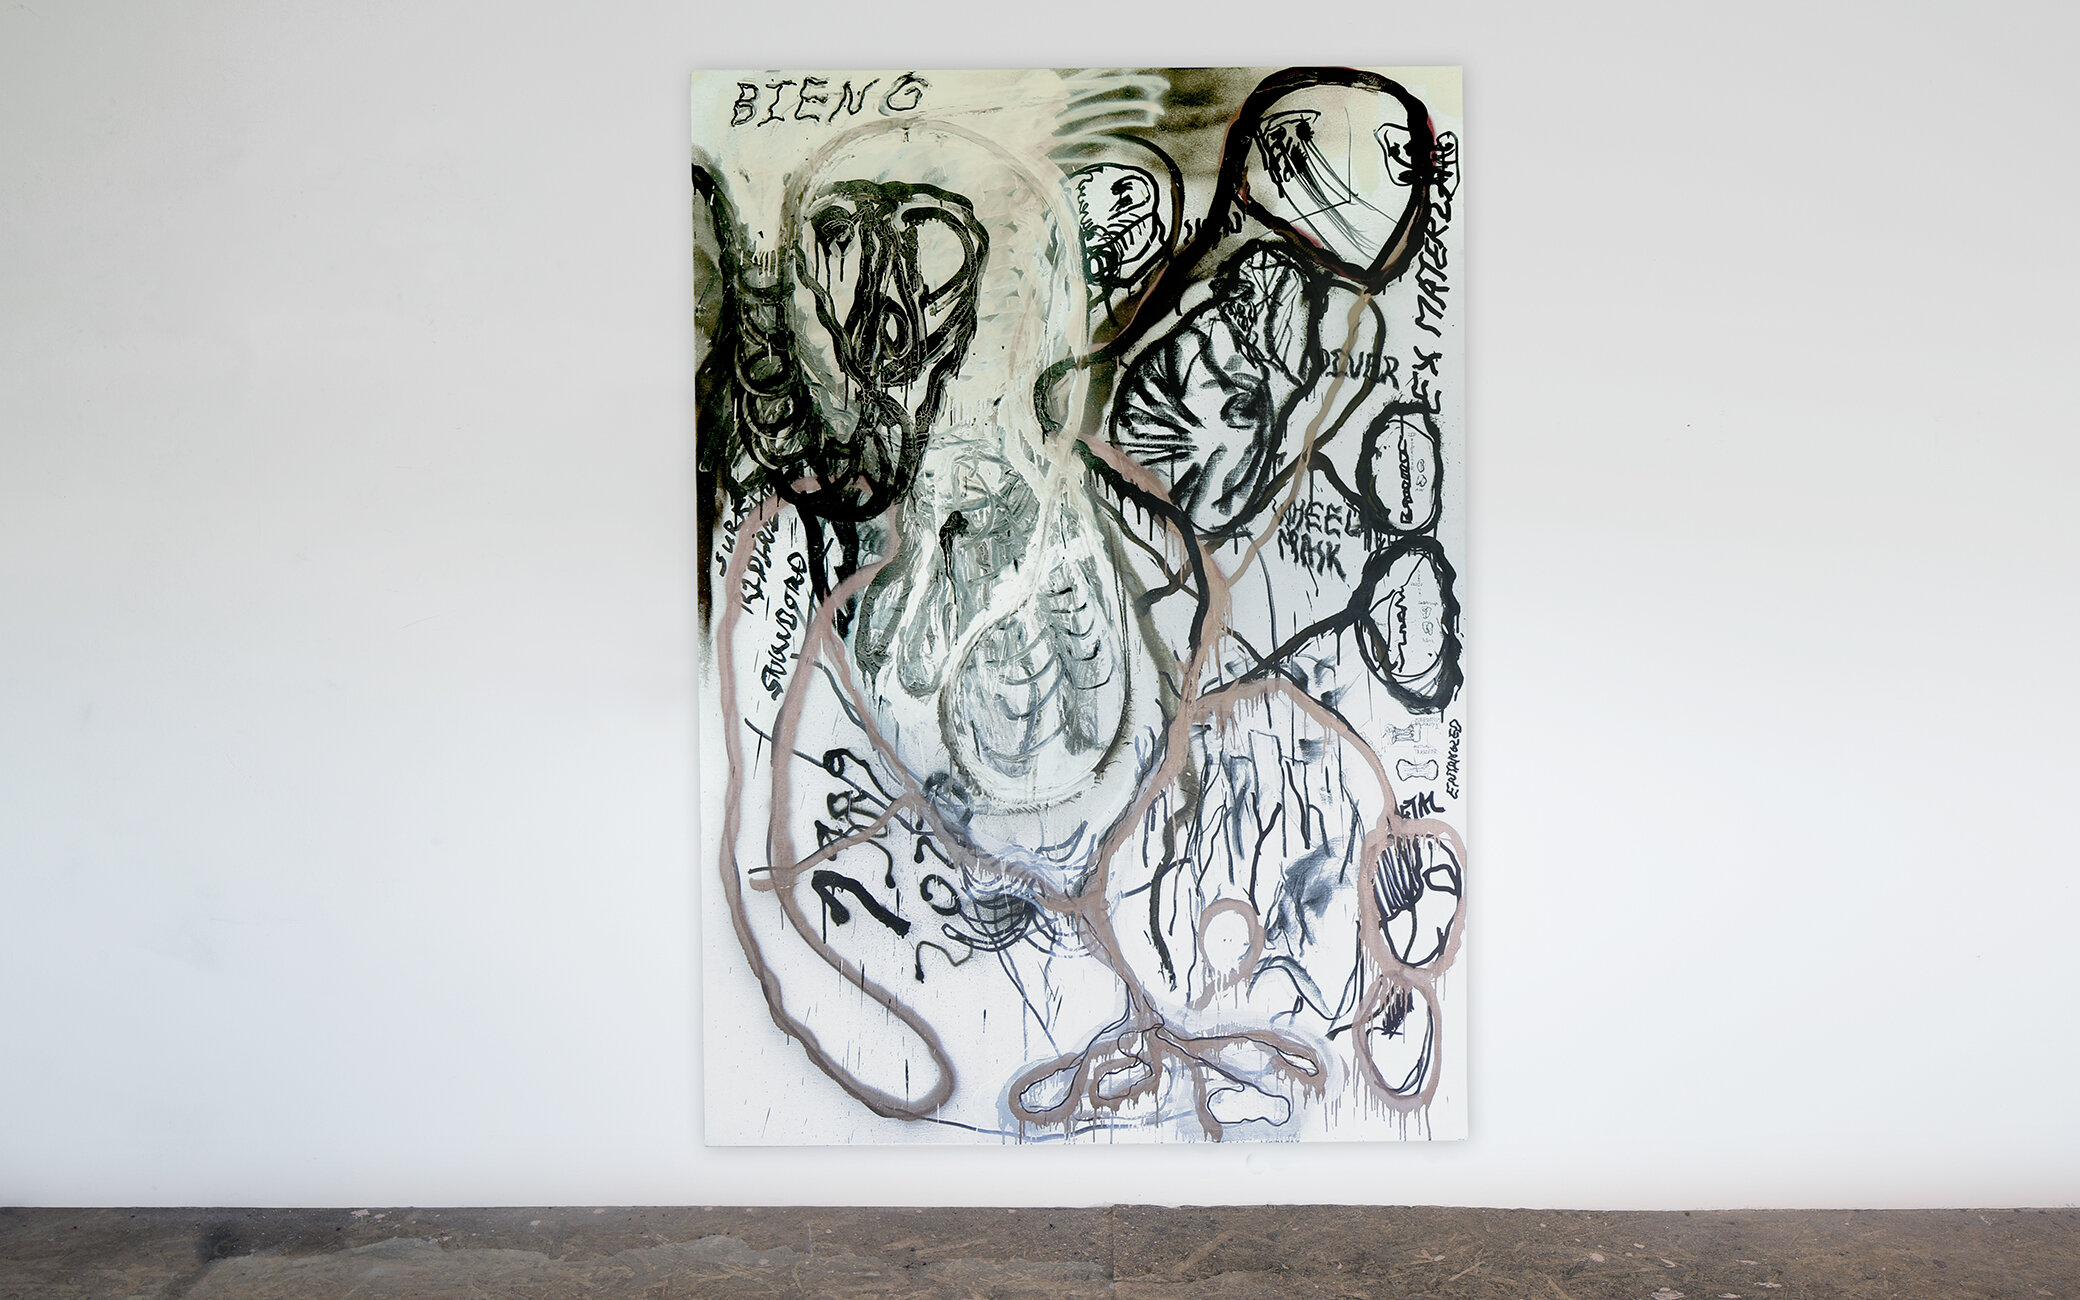  BIENG, 210 x 150 x 4 cm, 2020, Charcoal, Ink, permanent marker, spray paint on canvas  